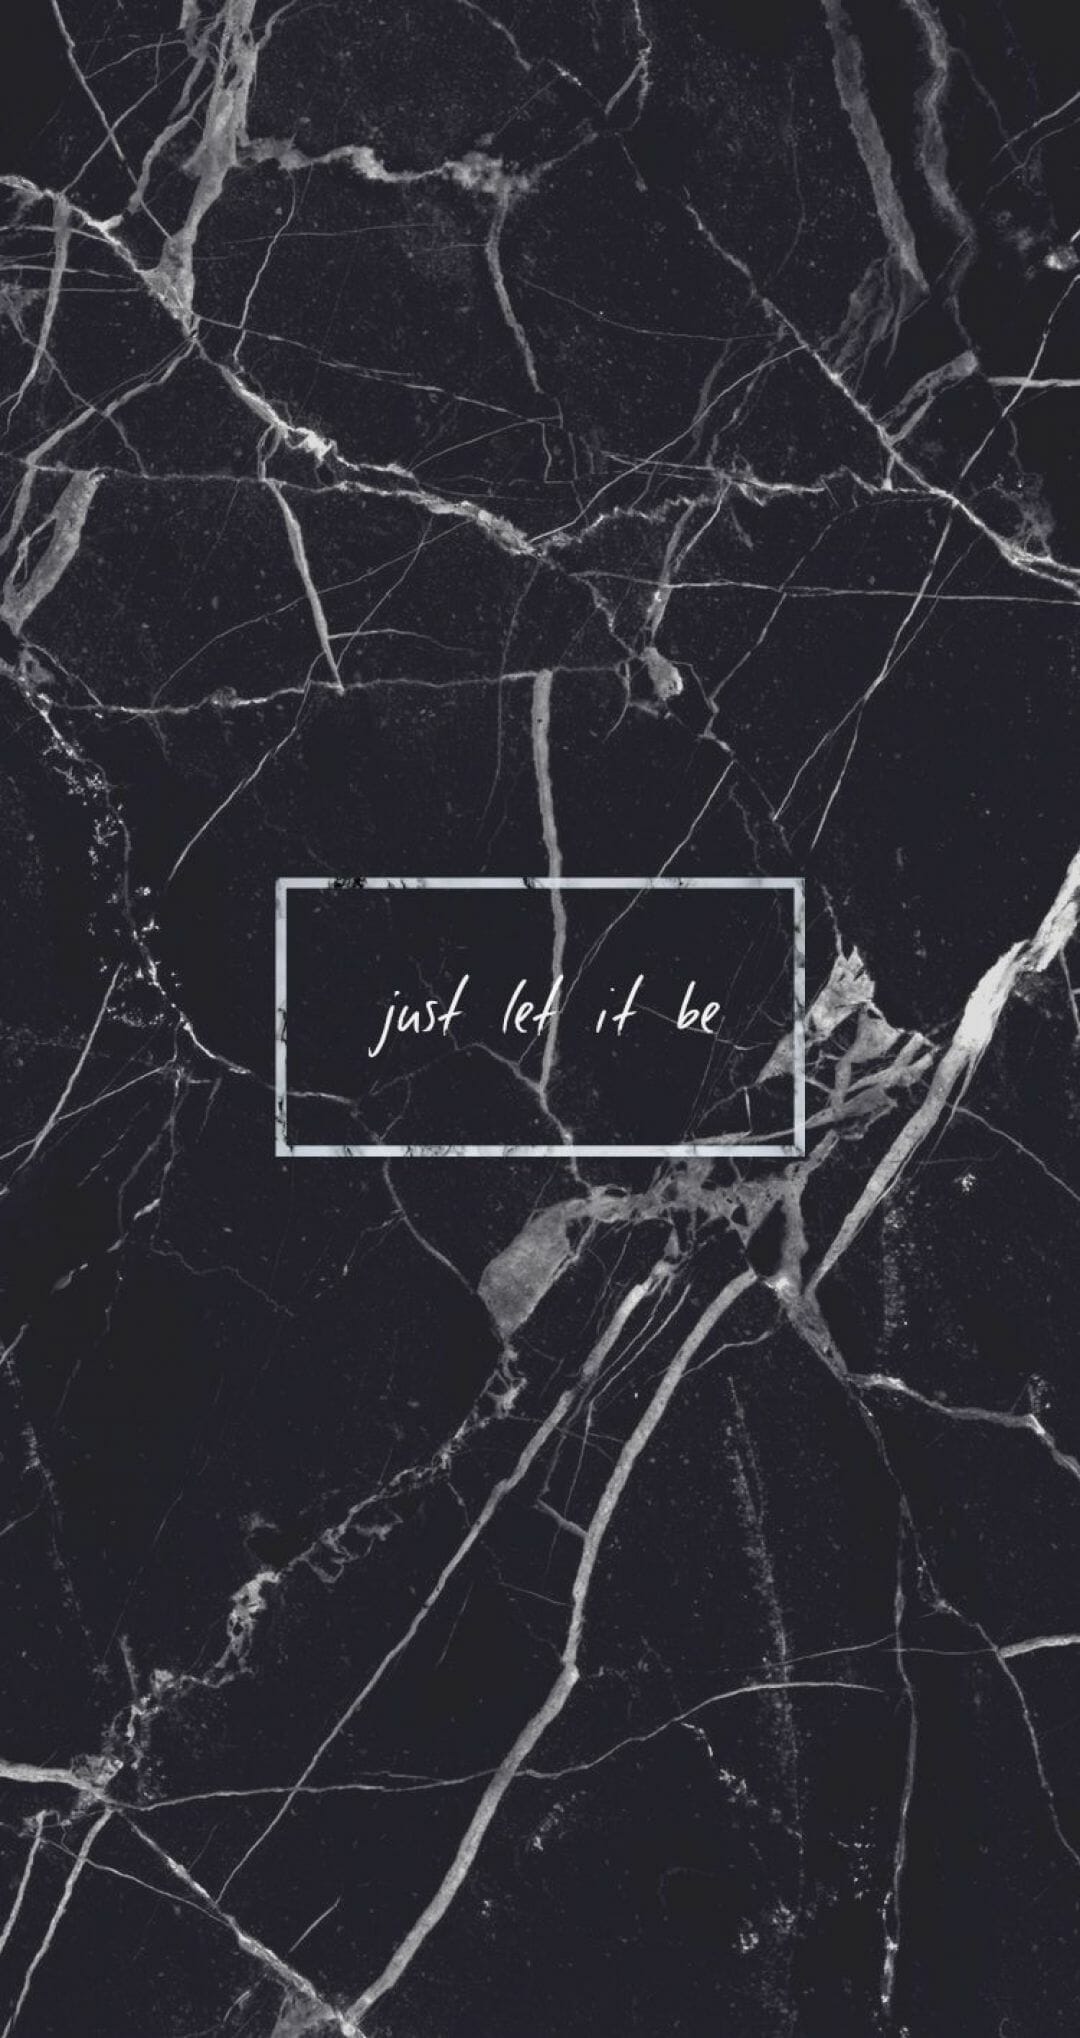 Black marble Just let it be Quote Grunge Tumblr Aesthetic iPhone / iPhone HD Wallpaper Background Download HD Wallpaper (Desktop Background / Android / iPhone) (1080p, 4k) (1080x2038) (2022)